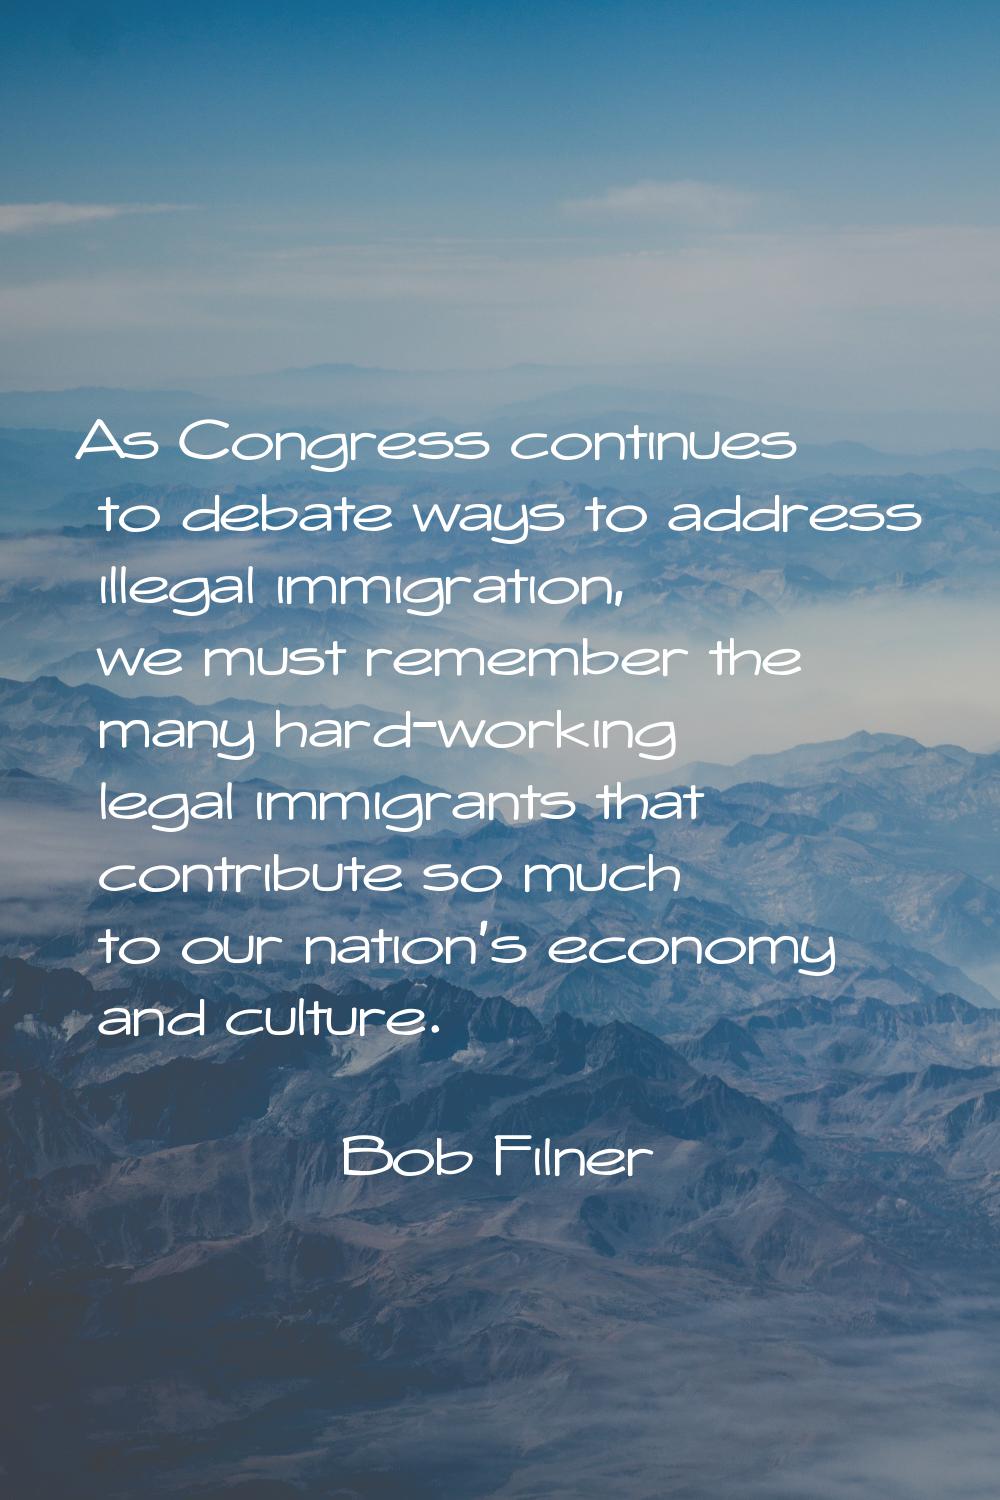 As Congress continues to debate ways to address illegal immigration, we must remember the many hard